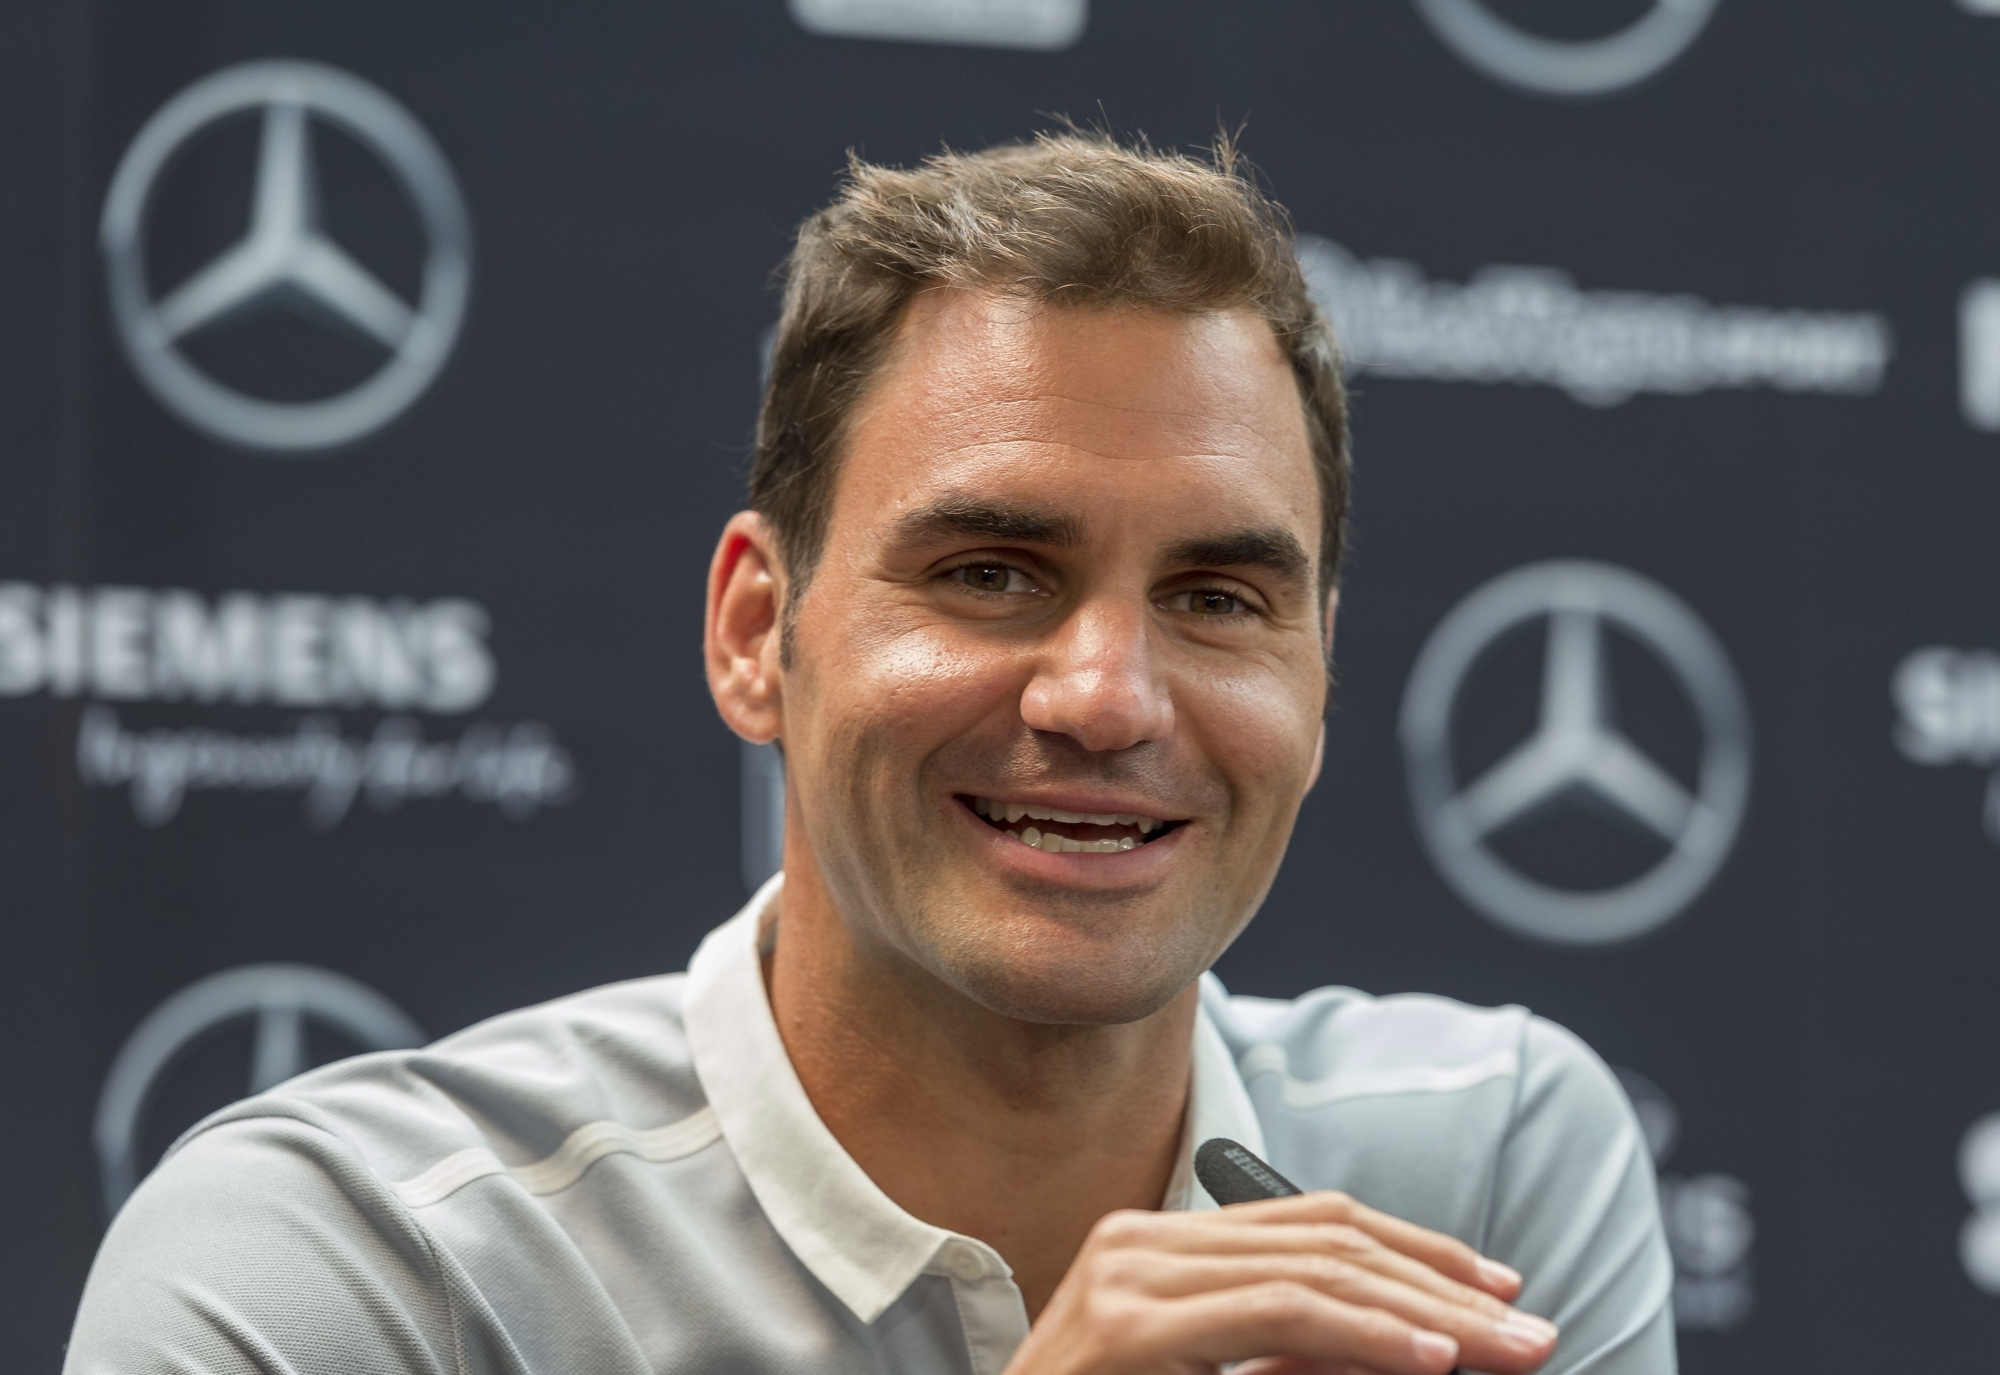 Professional tennis player Roger Federer from Switzerland speaks during a press conference at the ATP Mercedes Cup in Stuttgart, Germany, Monday, June 12, 2017. (Daniel Maurer/dpa via AP)